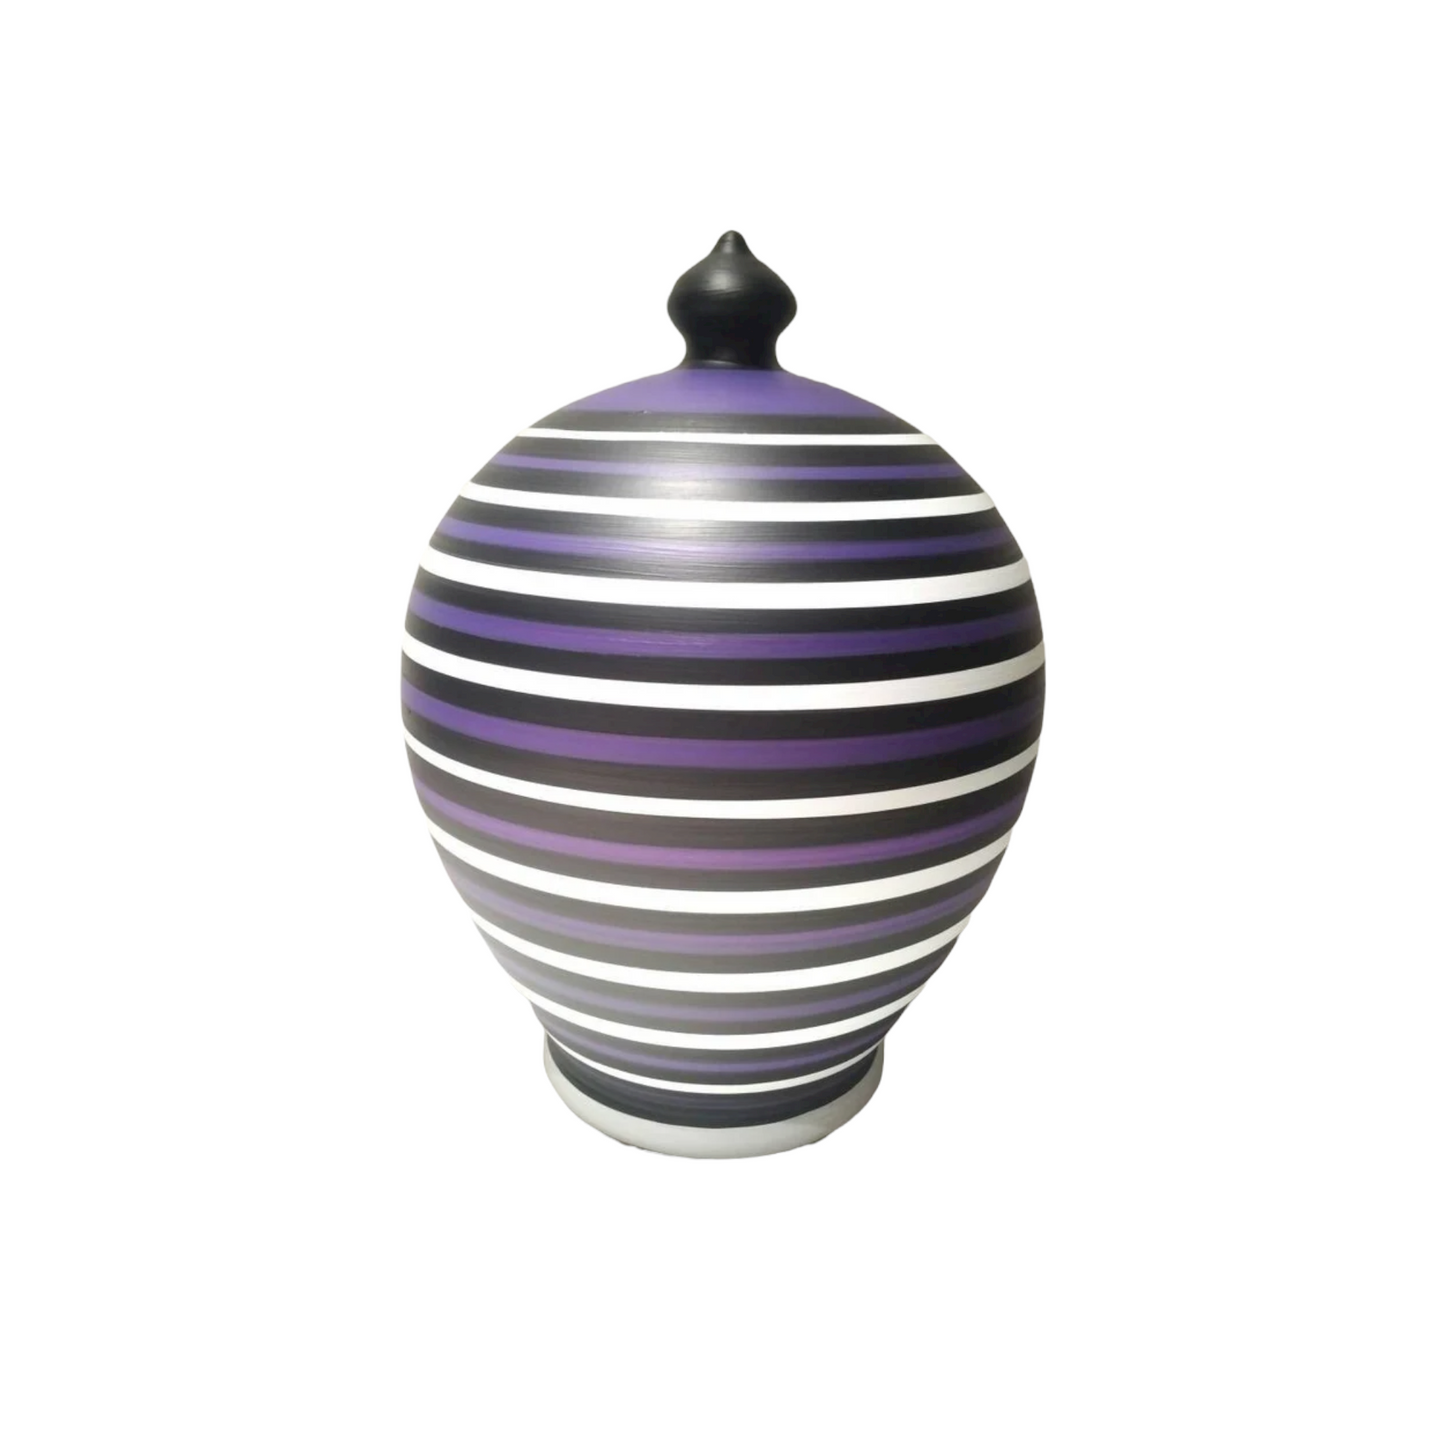 Ultramarine Violet, Black and White stripes, pottery piggy bank size 17 cm with or without hole